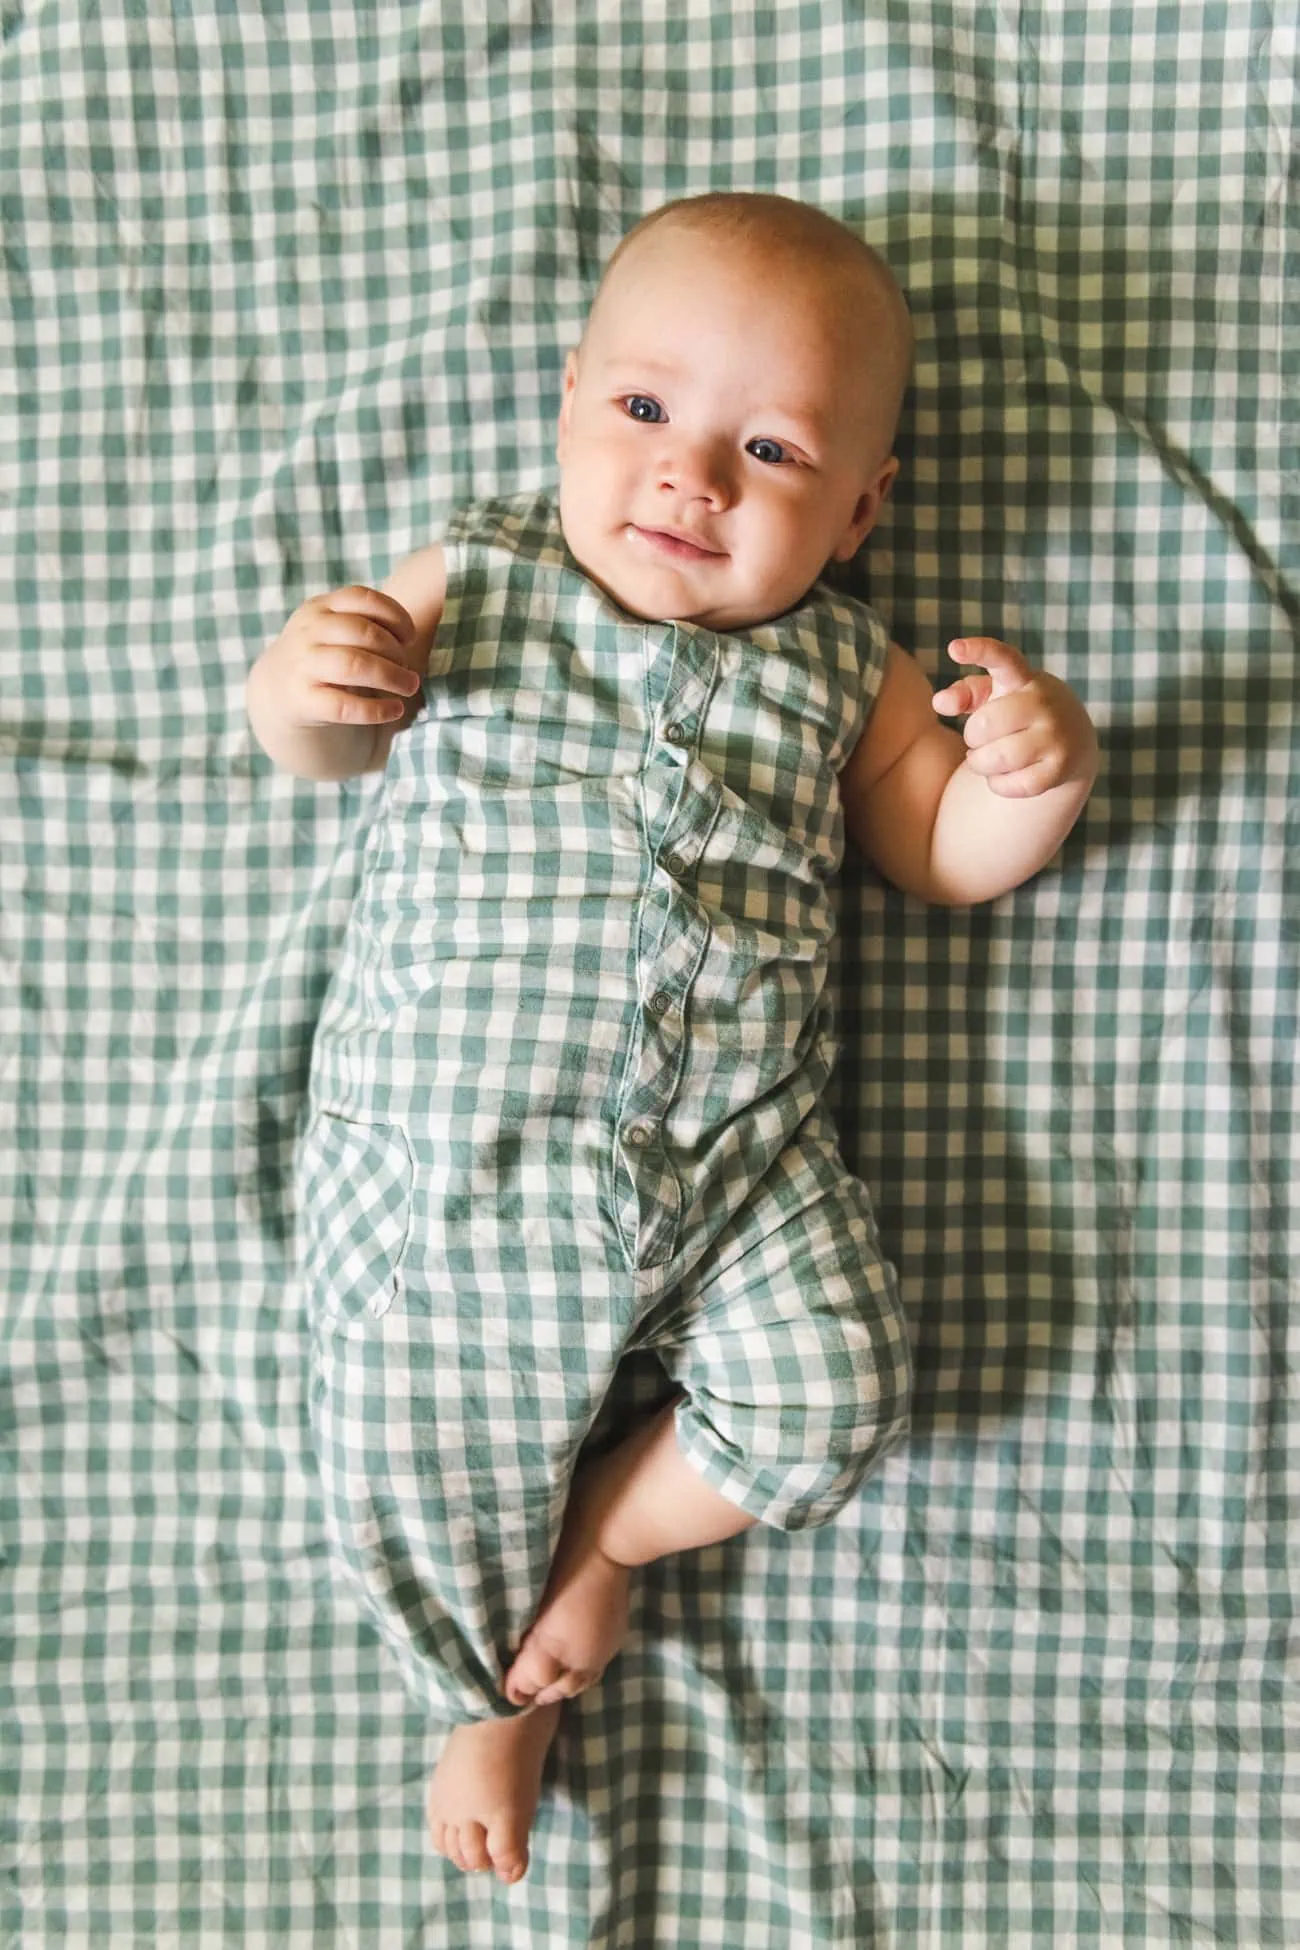 Baby Easter Outfit Guide - Cutest Ideas on What to Wear! - Feltman Brothers